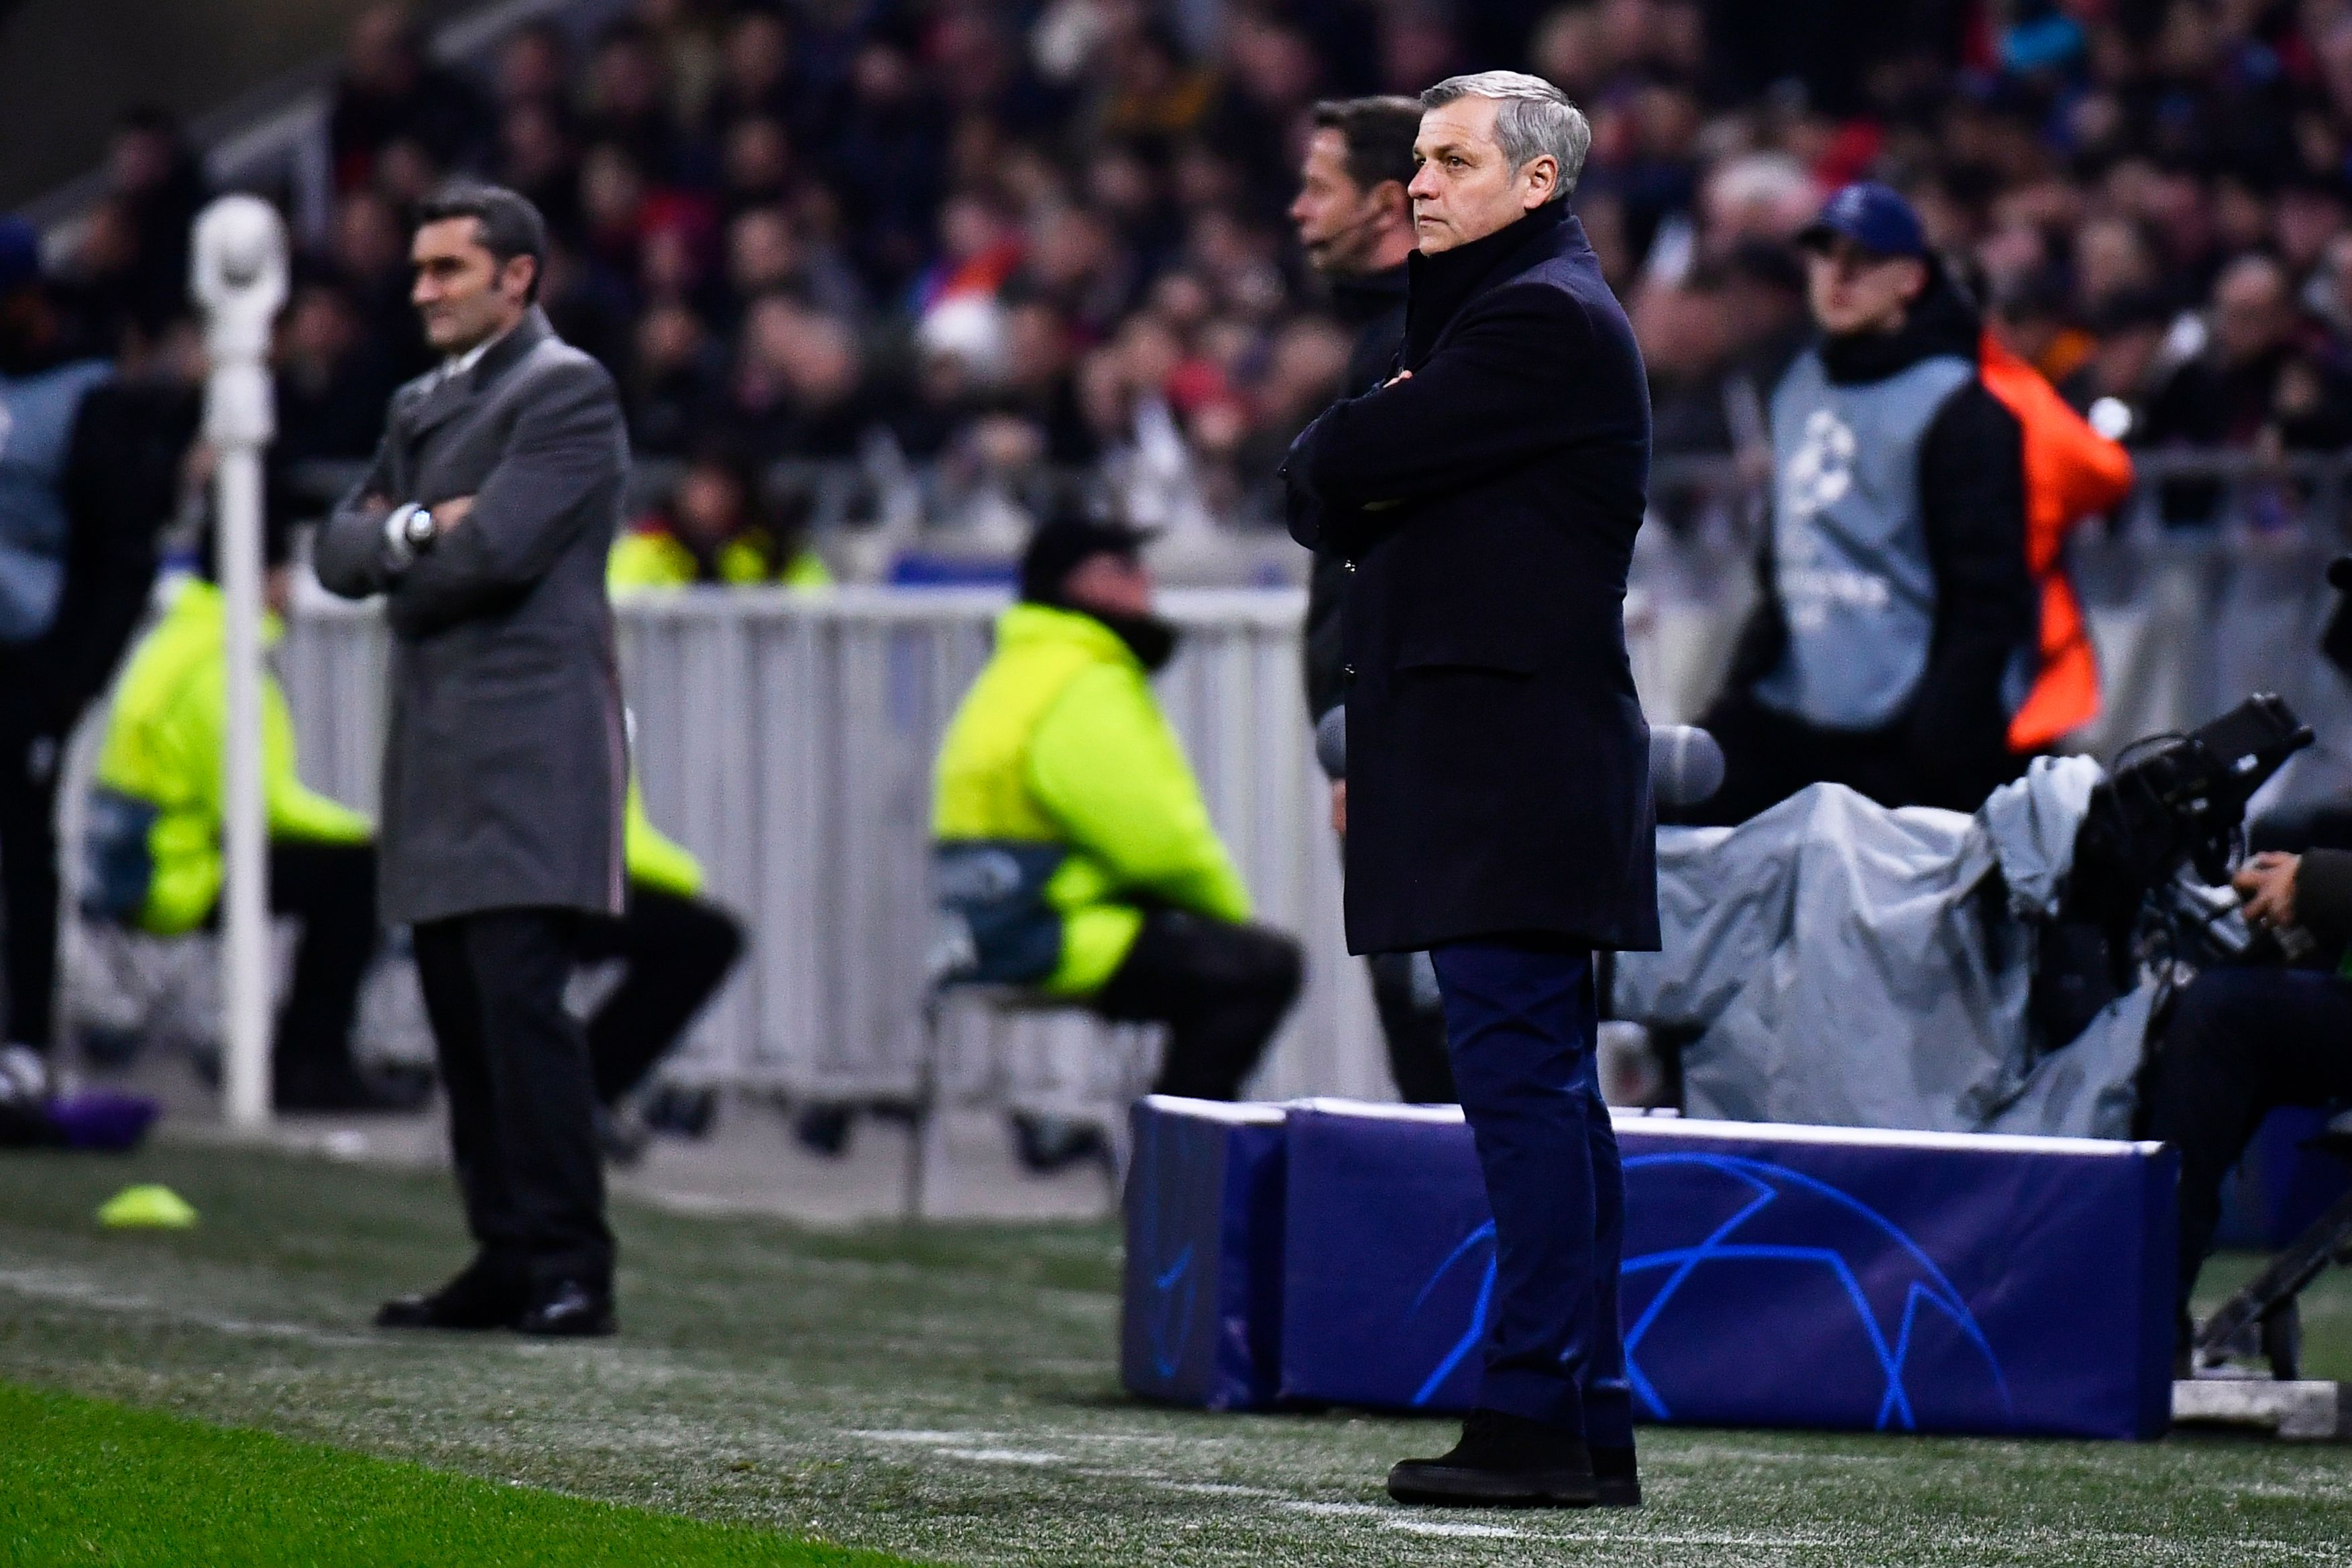 Lyon's French coach Bruno Genesio (R) stands next to Barcelona's Spanish coach Ernesto Valverde (L) during the UEFA Champions League round of 16 first leg football match between Lyon (OL) and FC Barcelona on February 19, 2019, at the Groupama Stadium in Decines-Charpieu, central-eastern France. (Photo by JEFF PACHOUD / AFP)        (Photo credit should read JEFF PACHOUD/AFP/Getty Images)